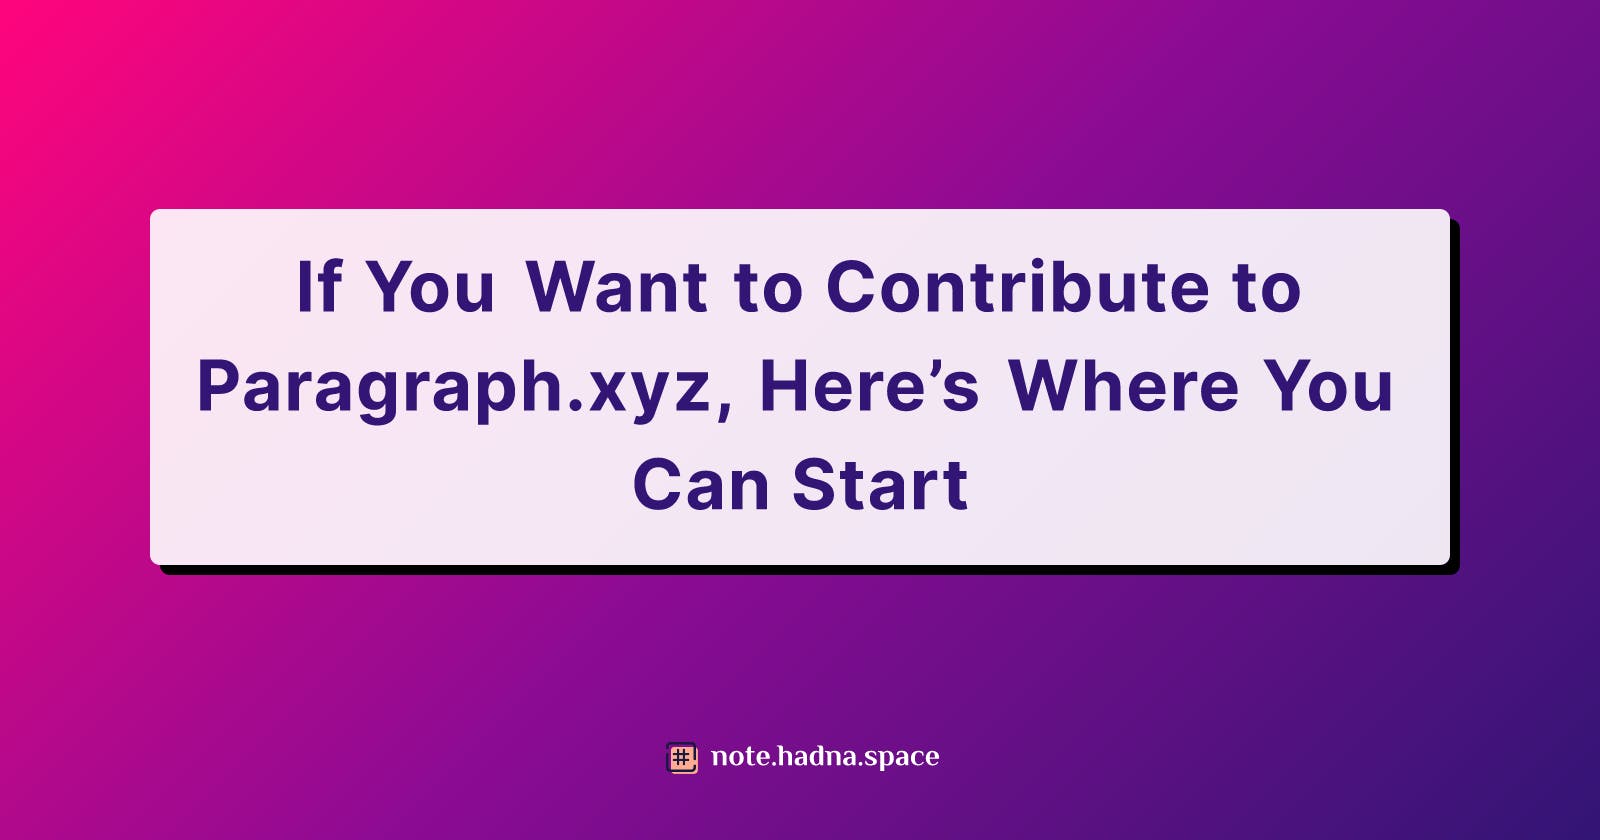 If You Want to Contribute to Paragraph.xyz, Here’s Where You Can Start